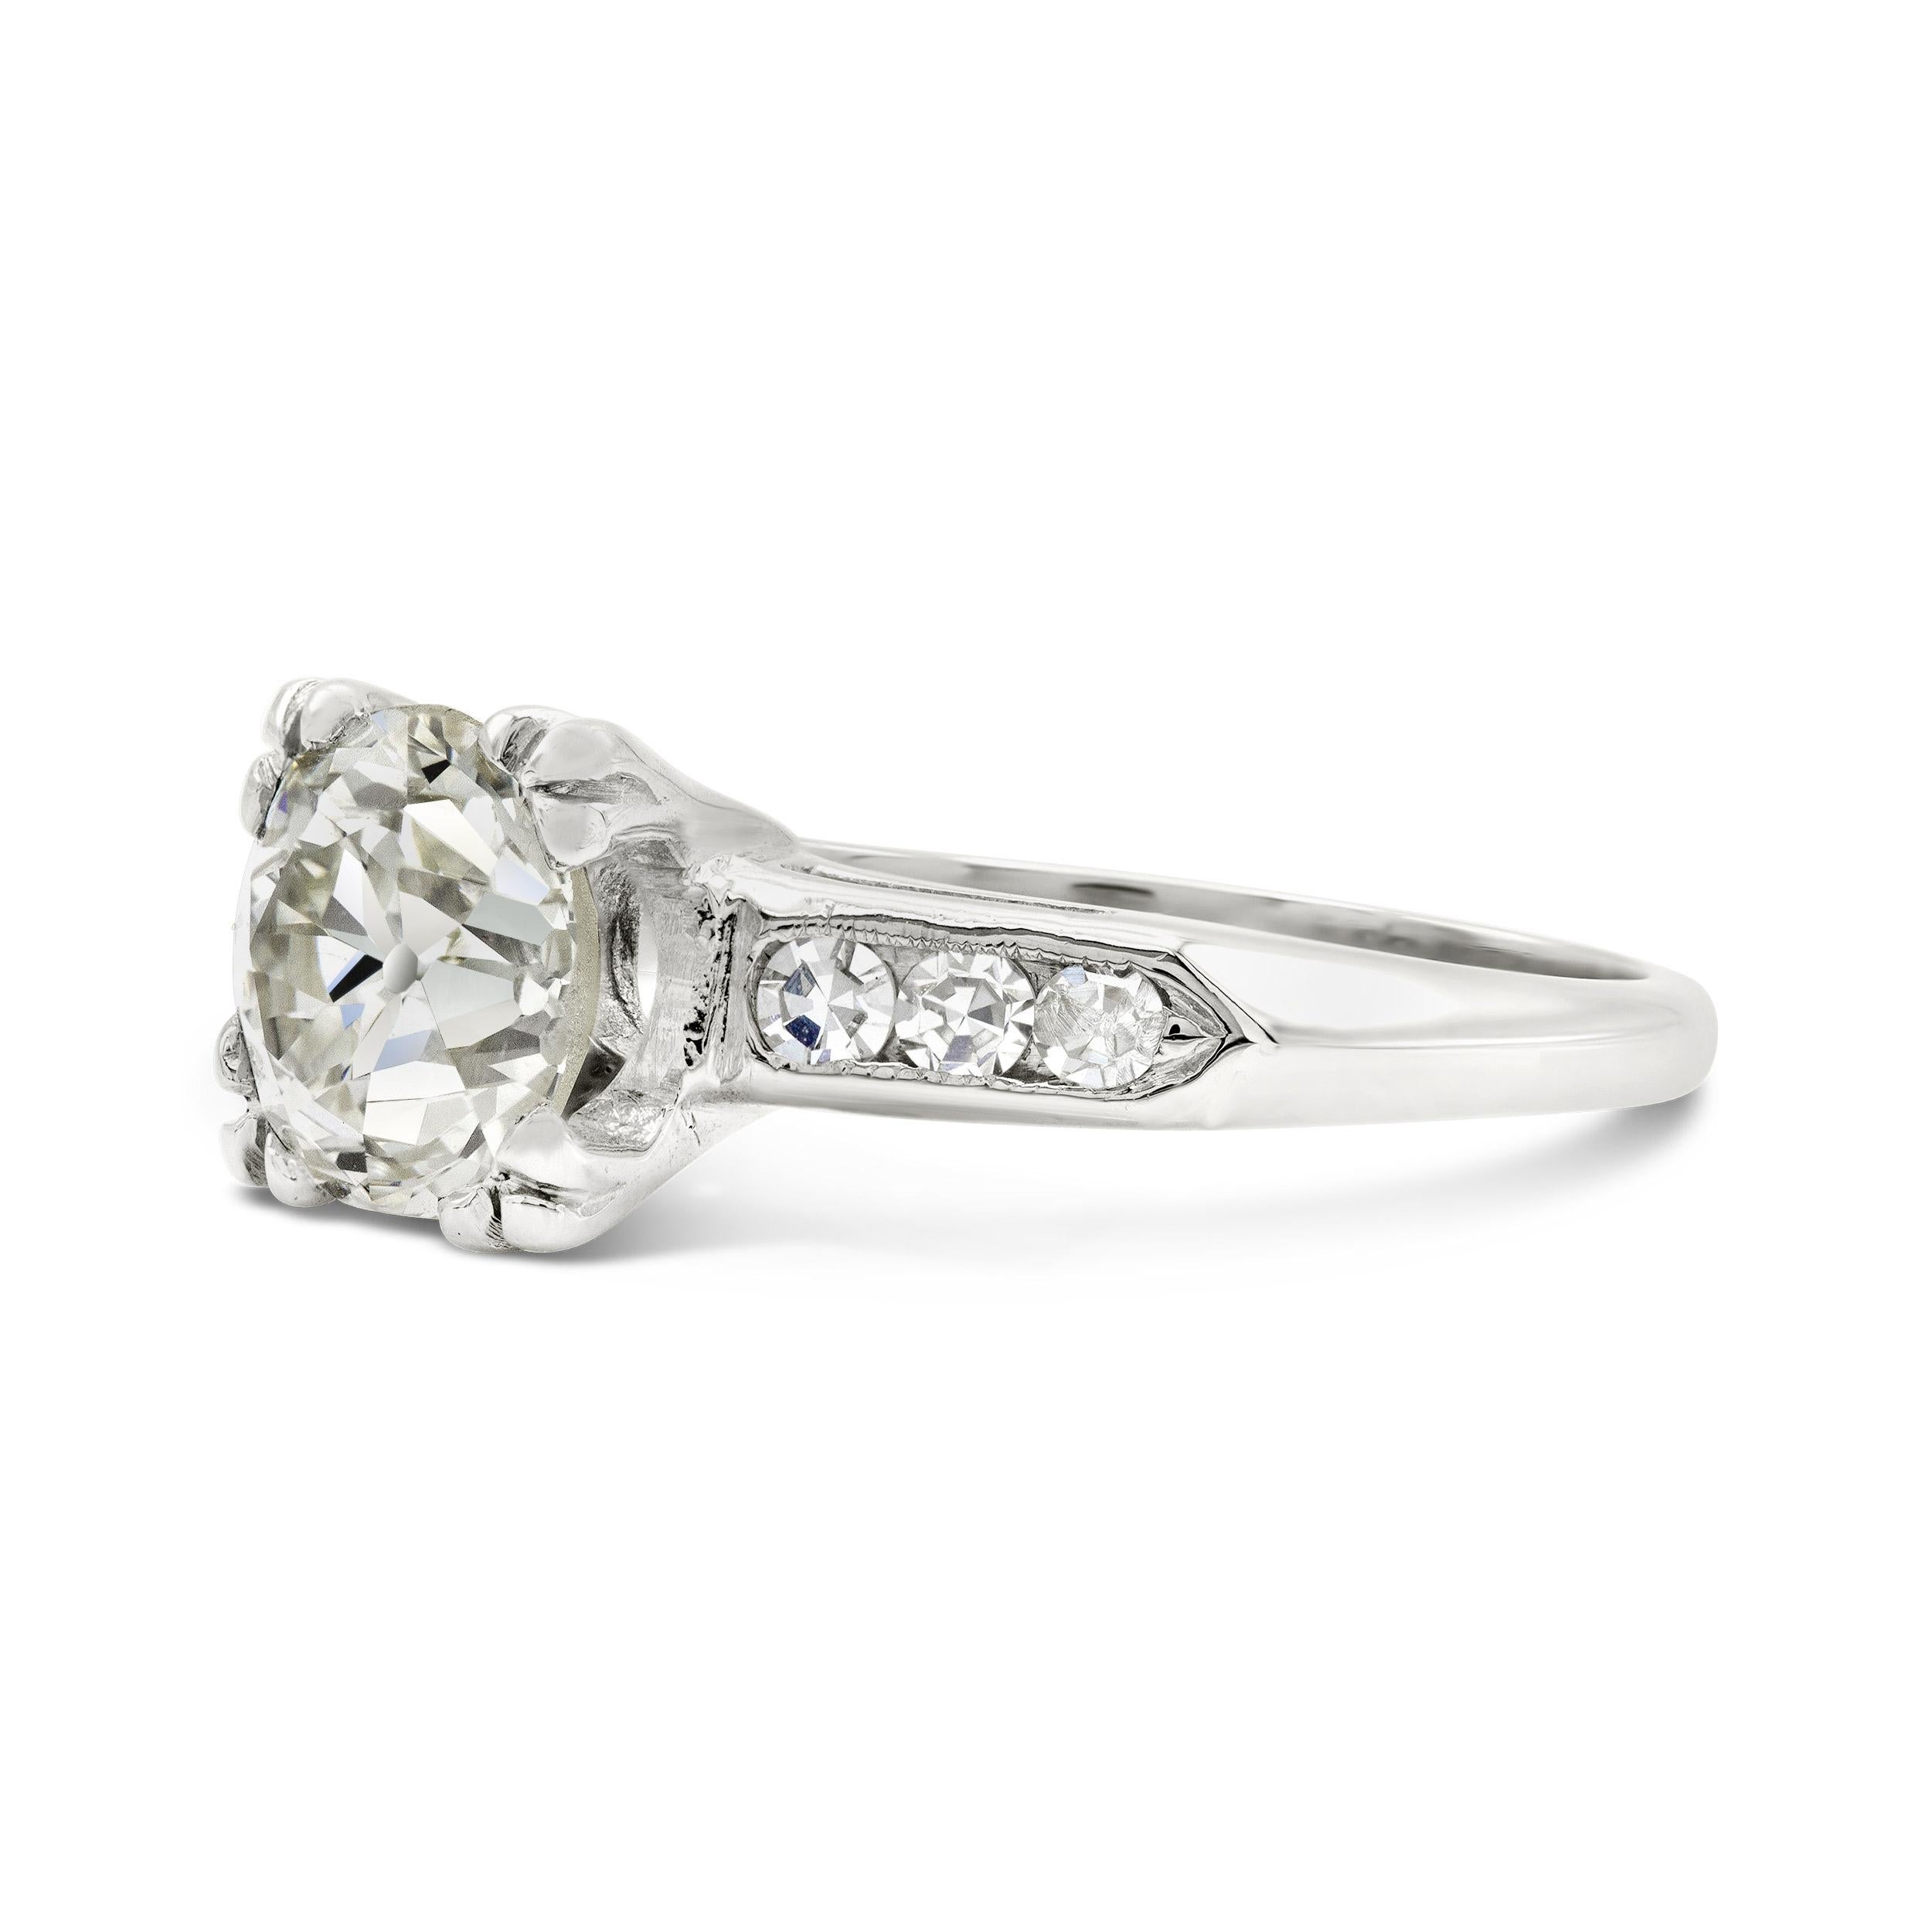 There is nothing more quintessentially deco than this engagement ring setting. A perfectly plump old European cut diamond steals the show, boasting an open culet and glistening facets. We are entranced by it's prismatic sparkle and equally lively